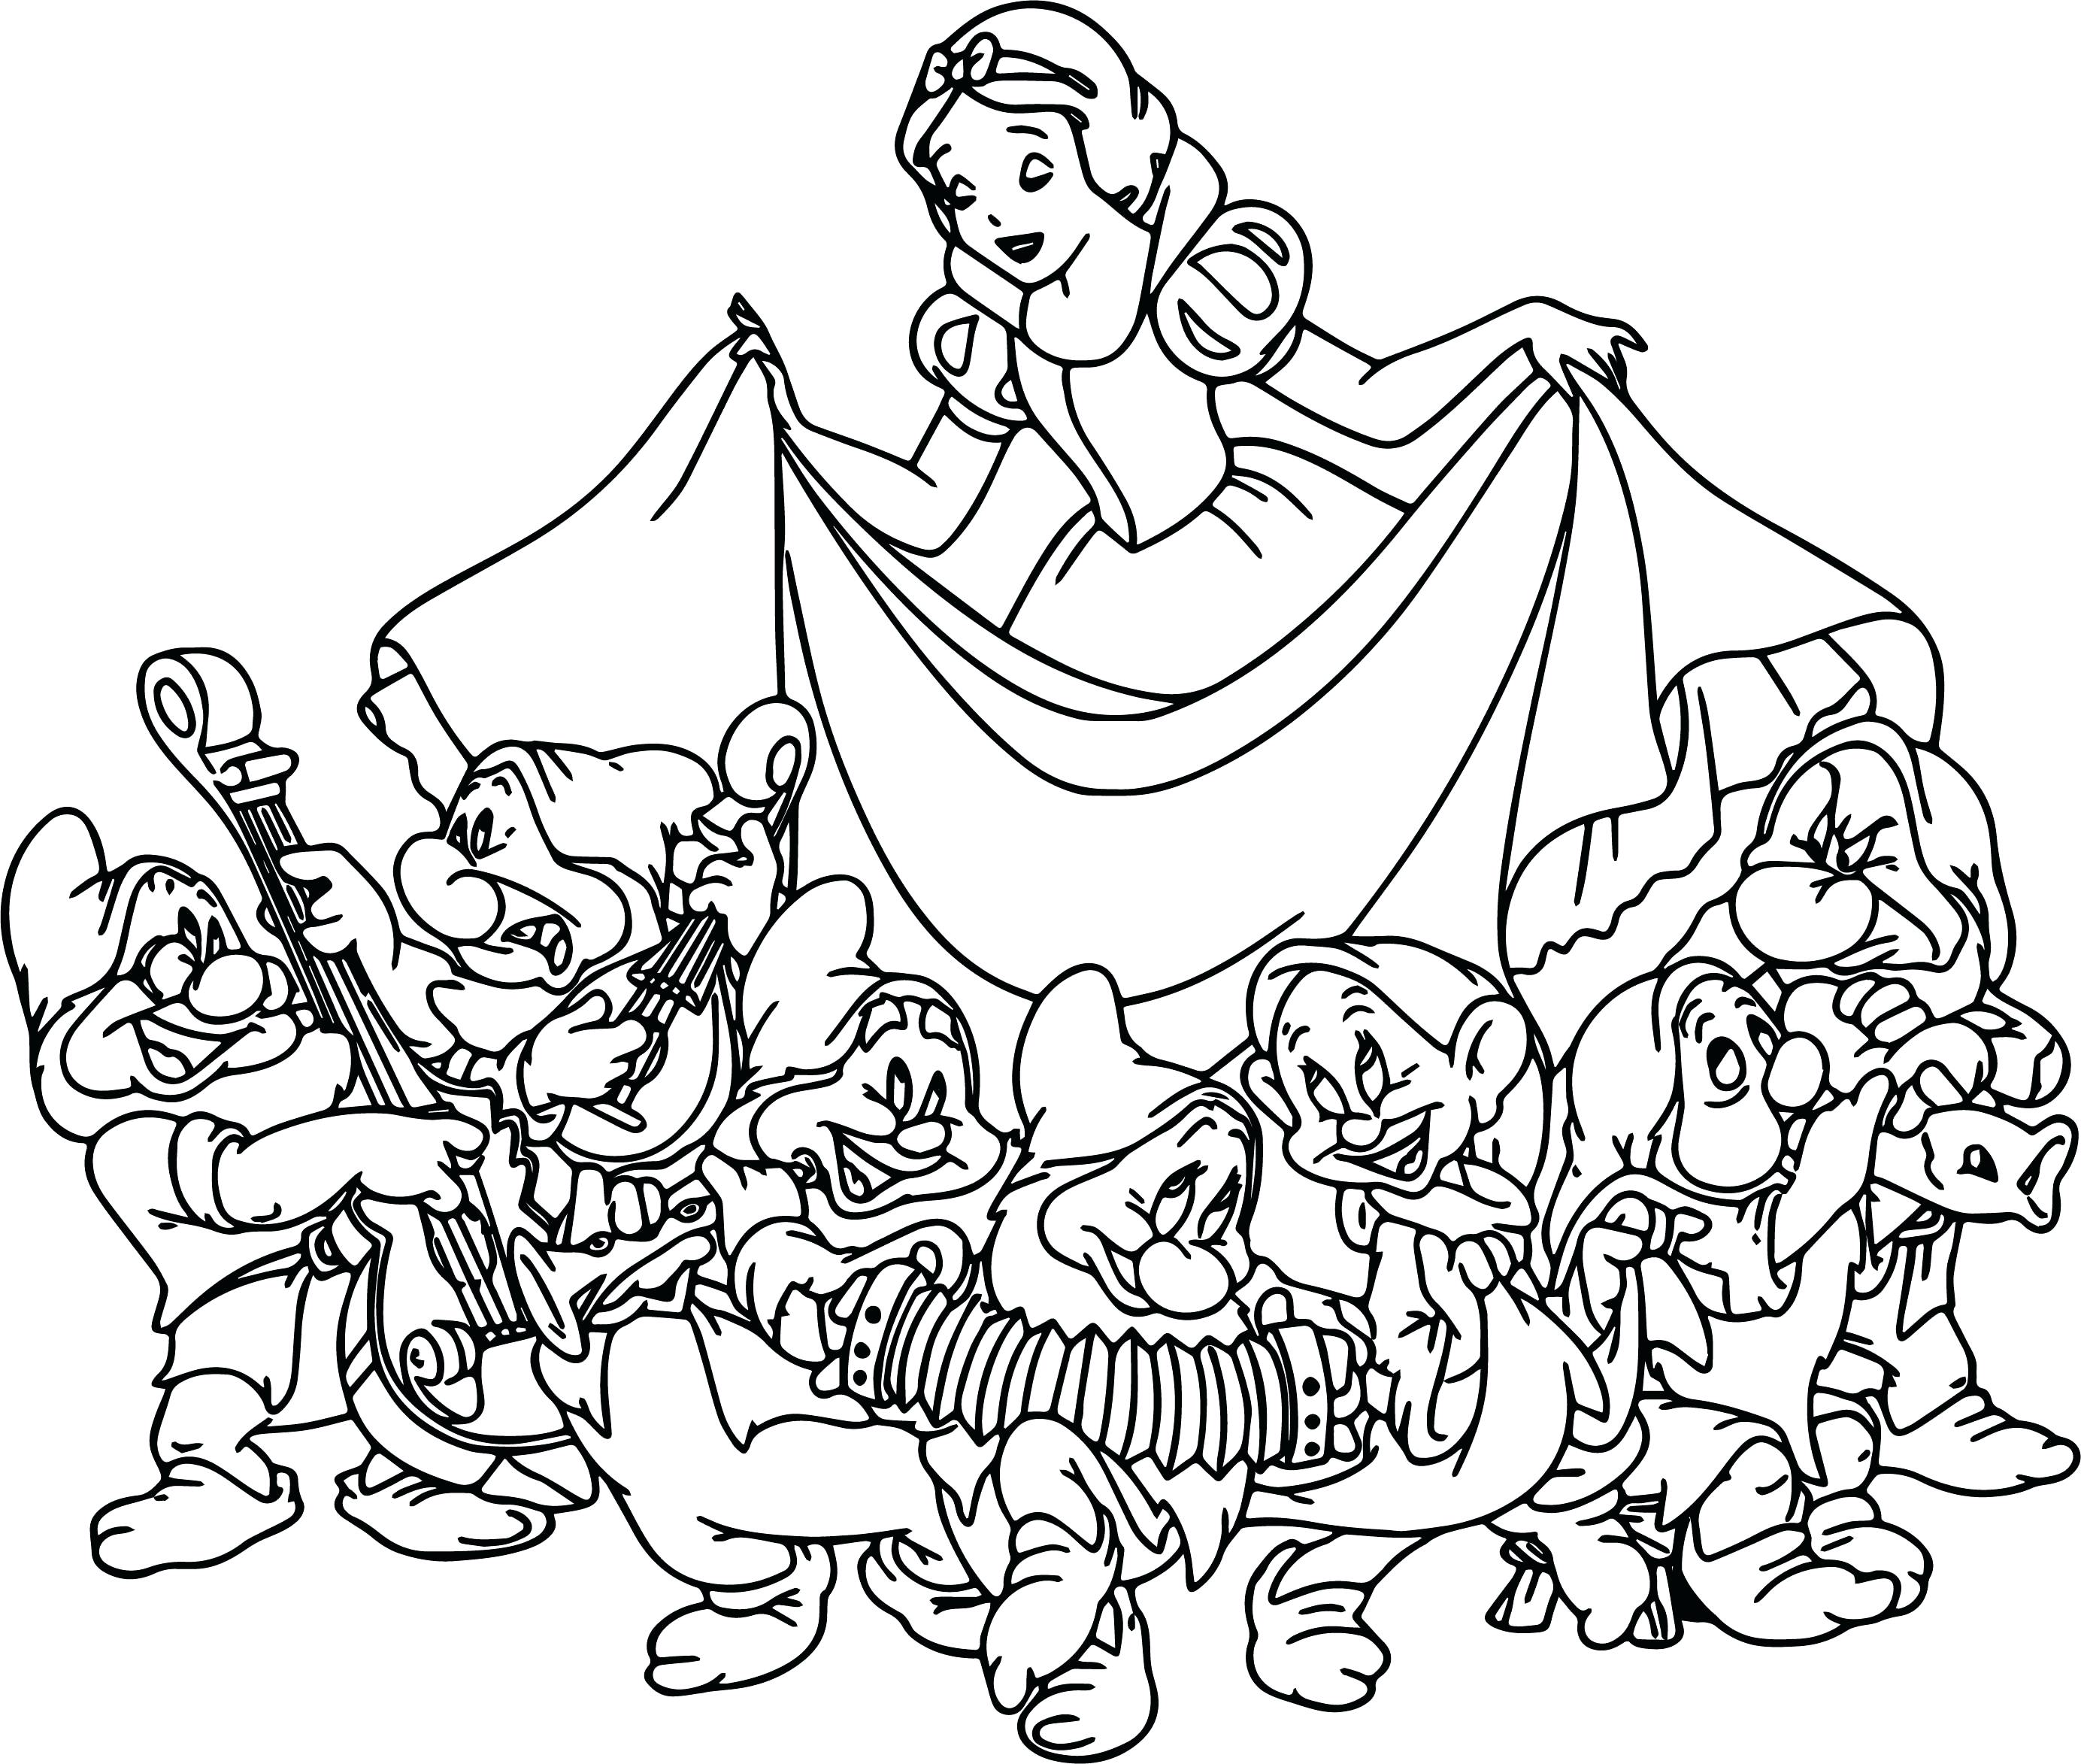 7 Dwarfs Coloring Pages | Free download on ClipArtMag